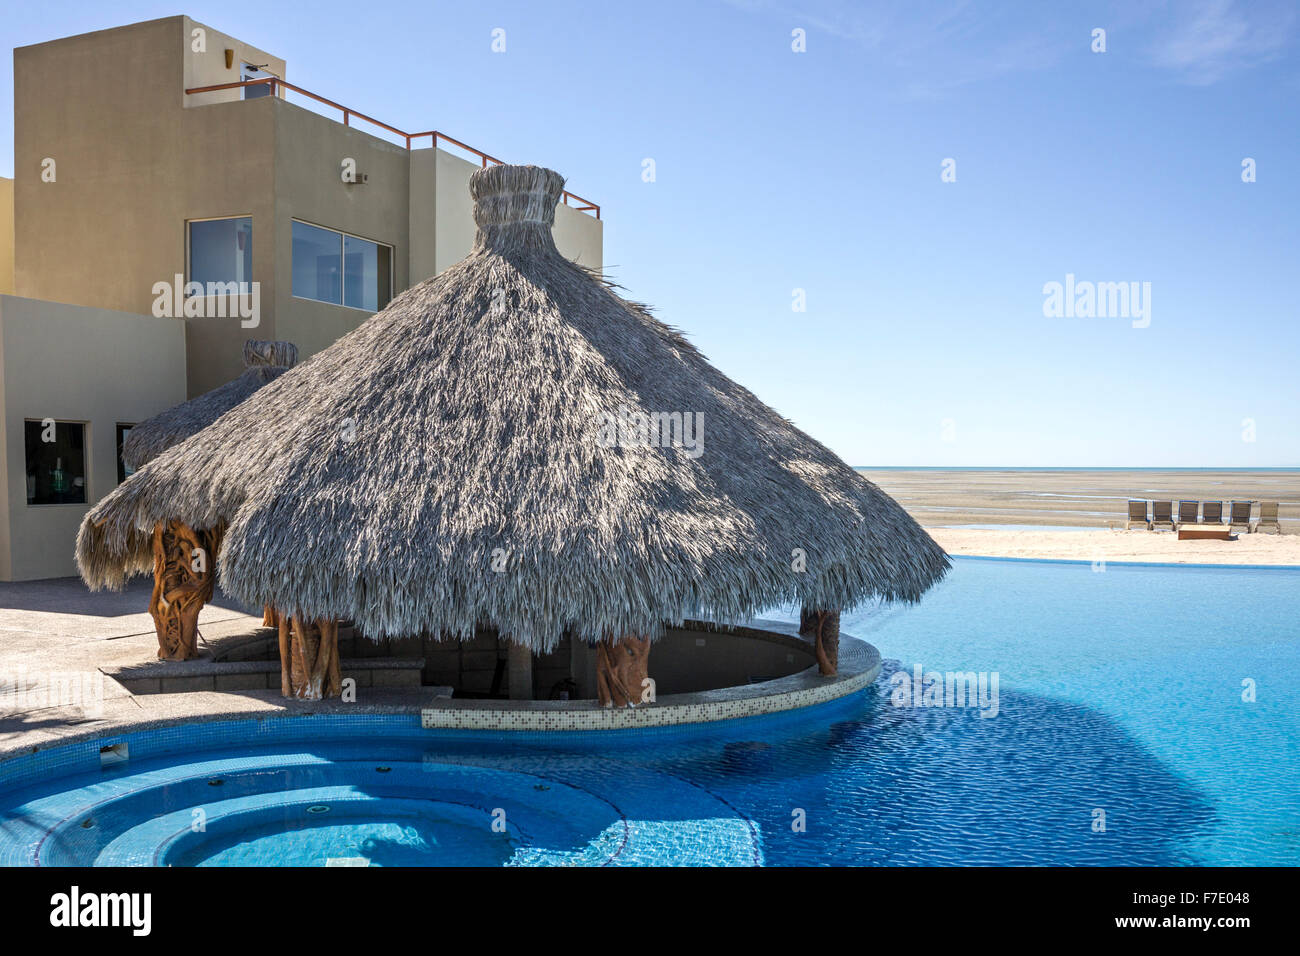 palapa awaits bar equipment to serve swimmers in unreal blue infinity pool overlooking wide beach stretching far out at low tide Stock Photo